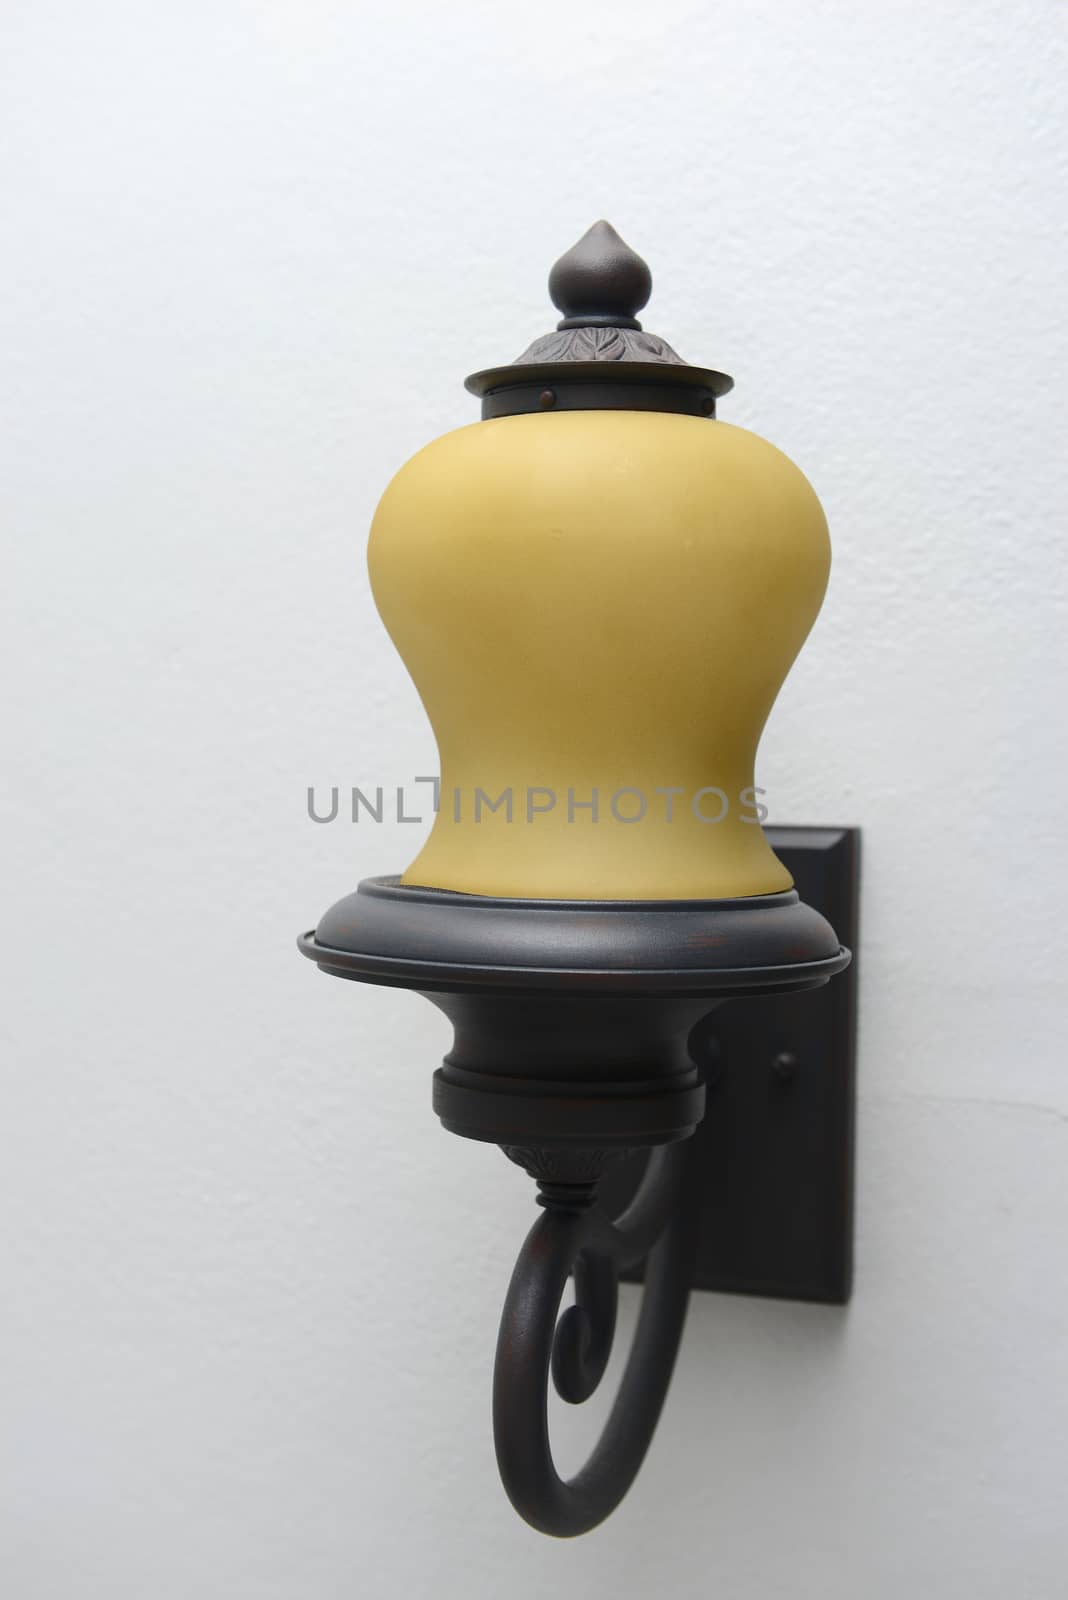 Wall Lamp by antpkr